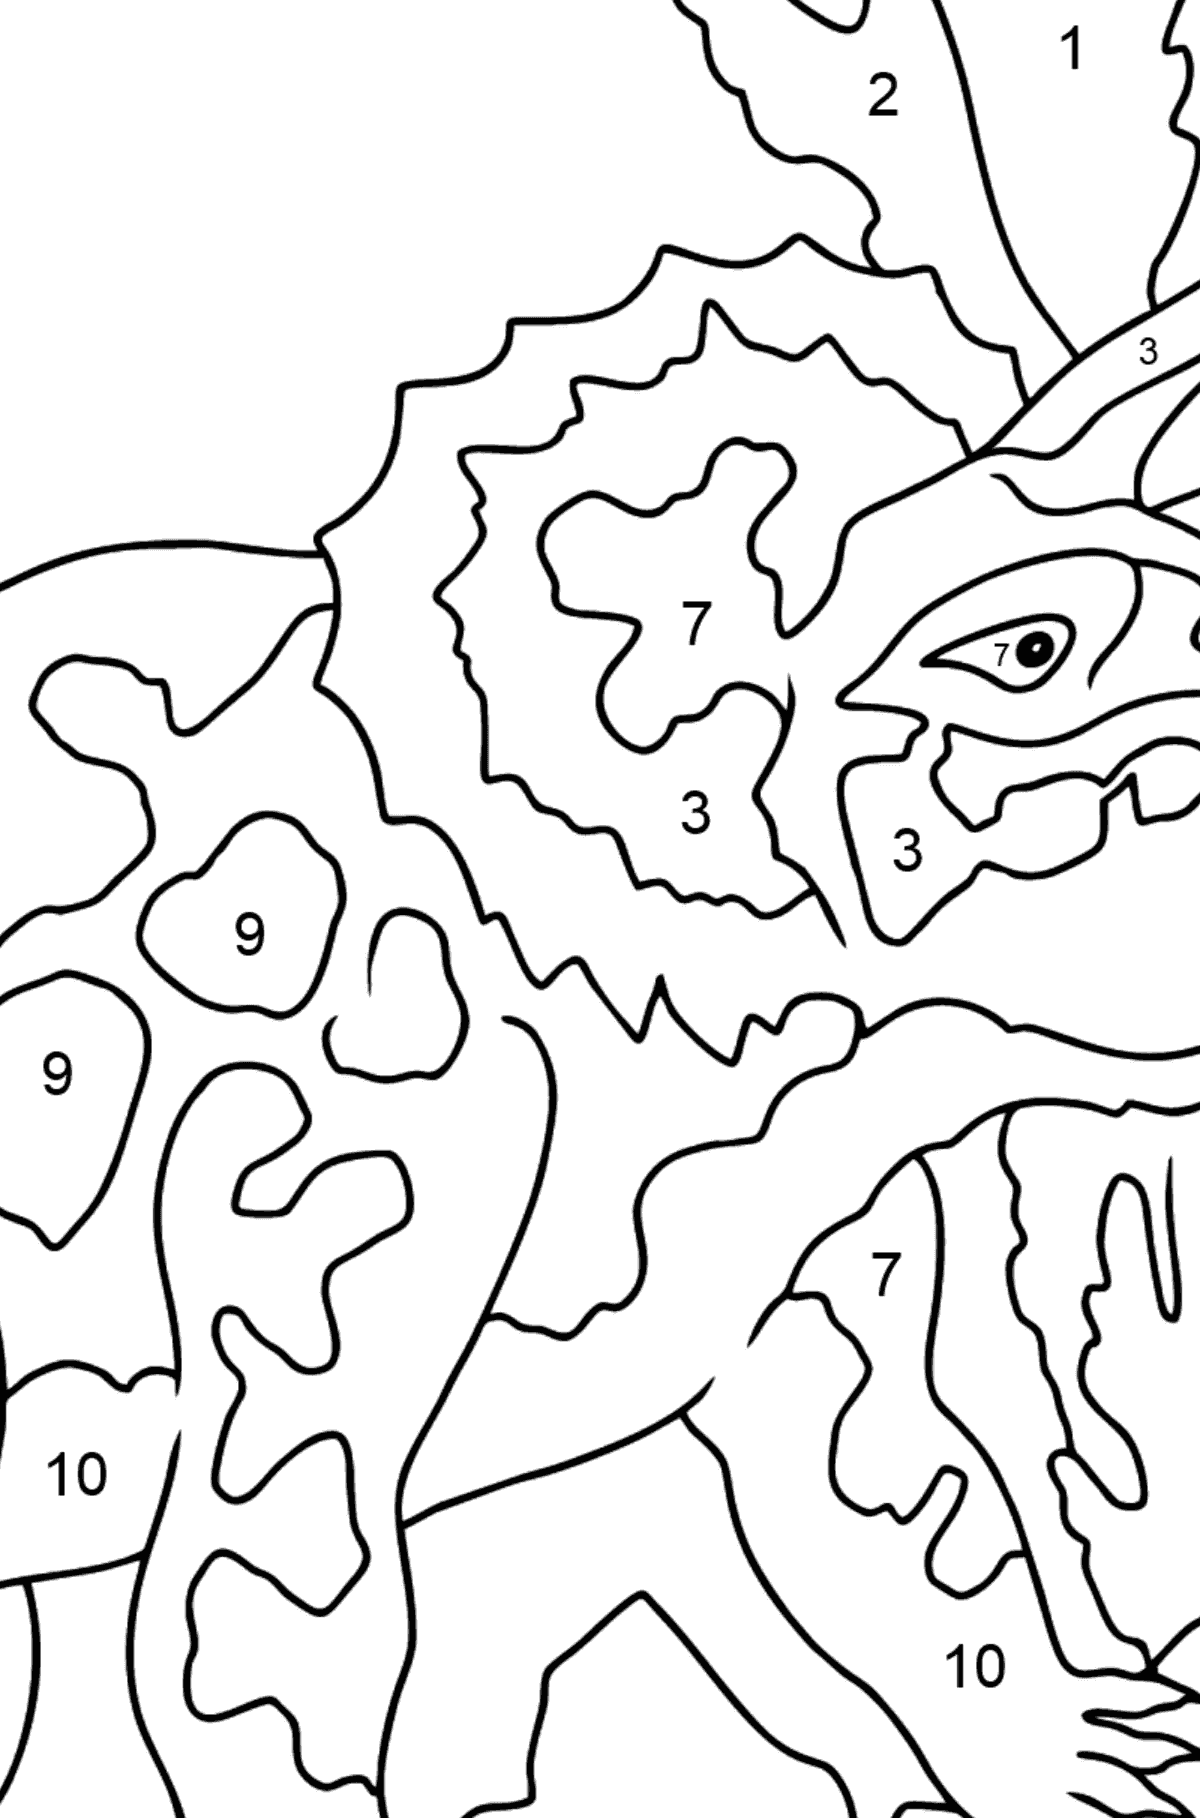 Coloring Page - Triceratops - A Peaceful Horned Dinosaur - Coloring by Numbers for Kids